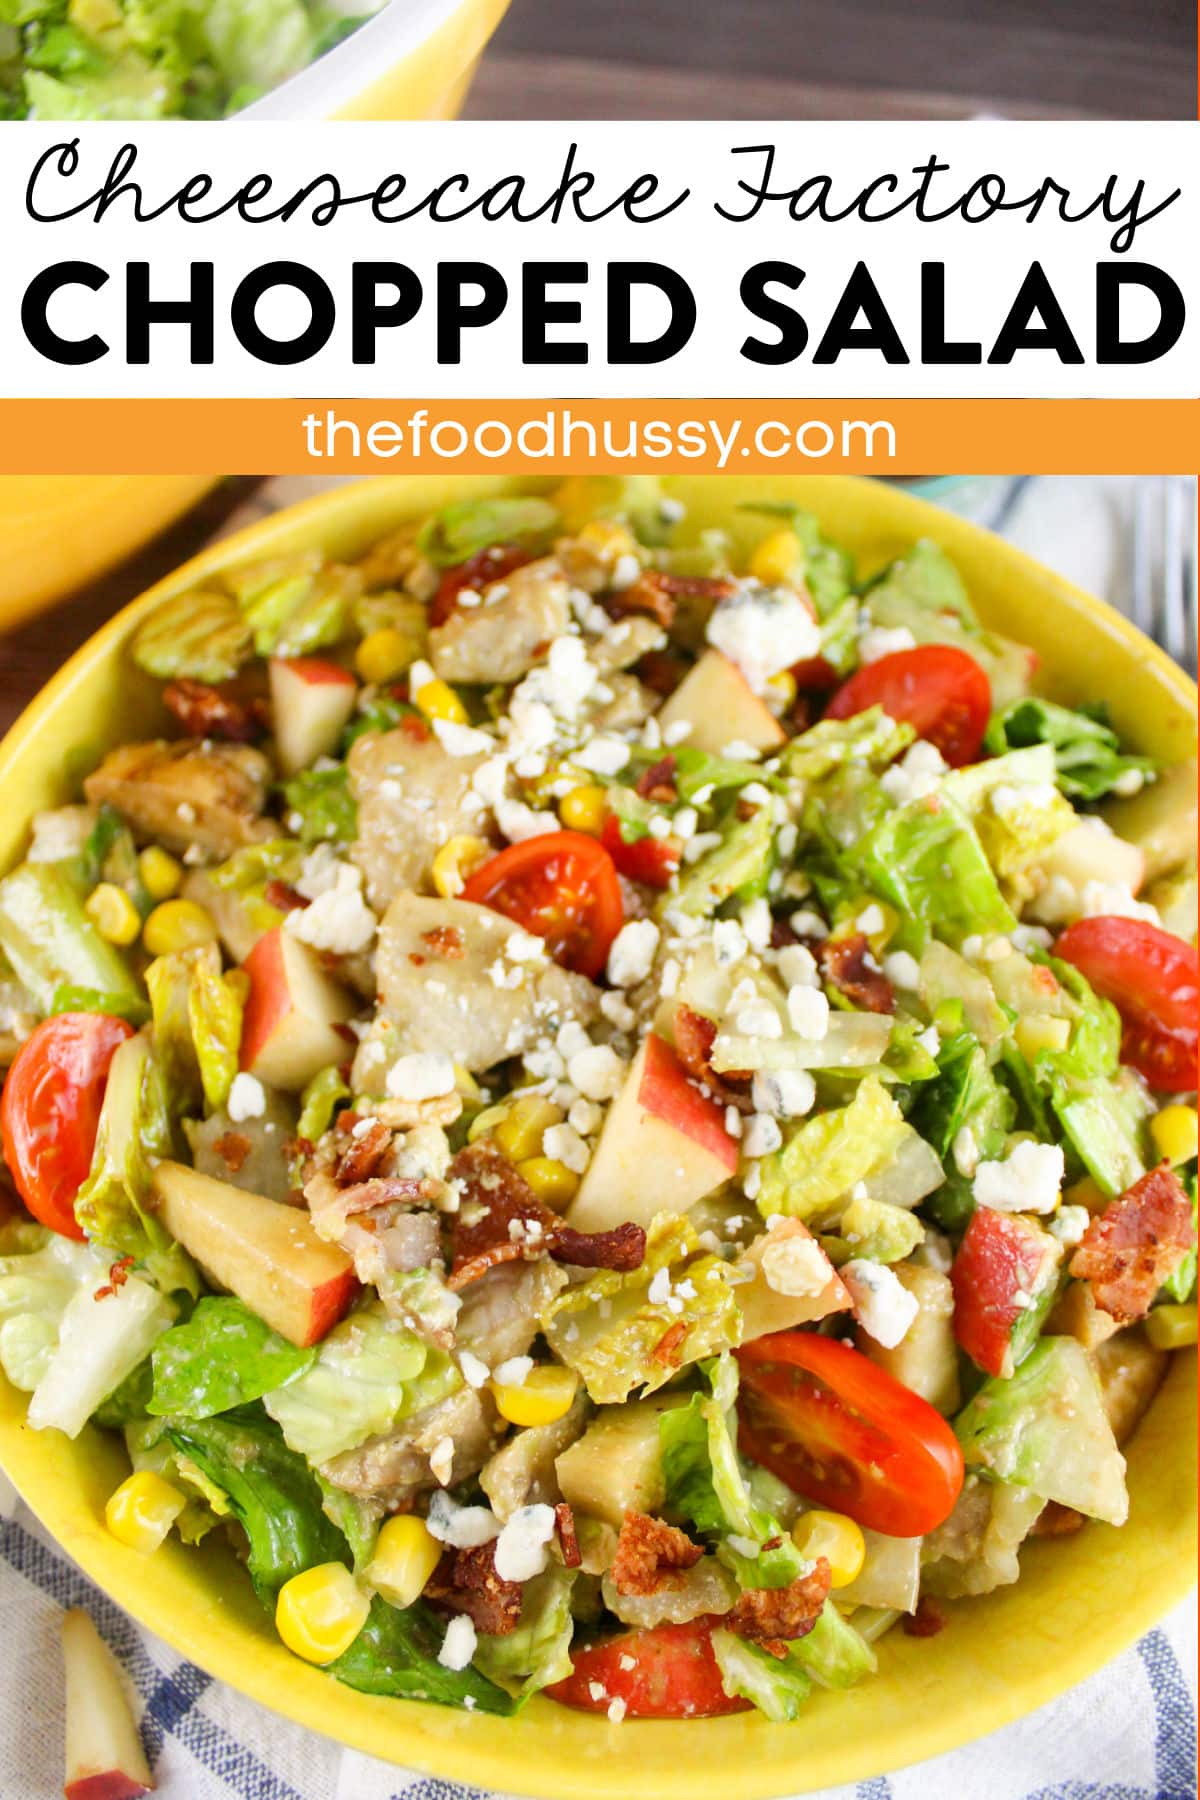 Cheesecake Factory Chopped Salad is a delicious blend of romaine, juicy grilled chicken, grape tomatoes, diced avocado, sweet corn, smoky bacon, chunks of blue cheese and diced apple all tossed in a light Balsamic Vinaigrette! This salad has something for everyone - with a little crunch, a little sweet, a little meat - it's my favorite! via @foodhussy